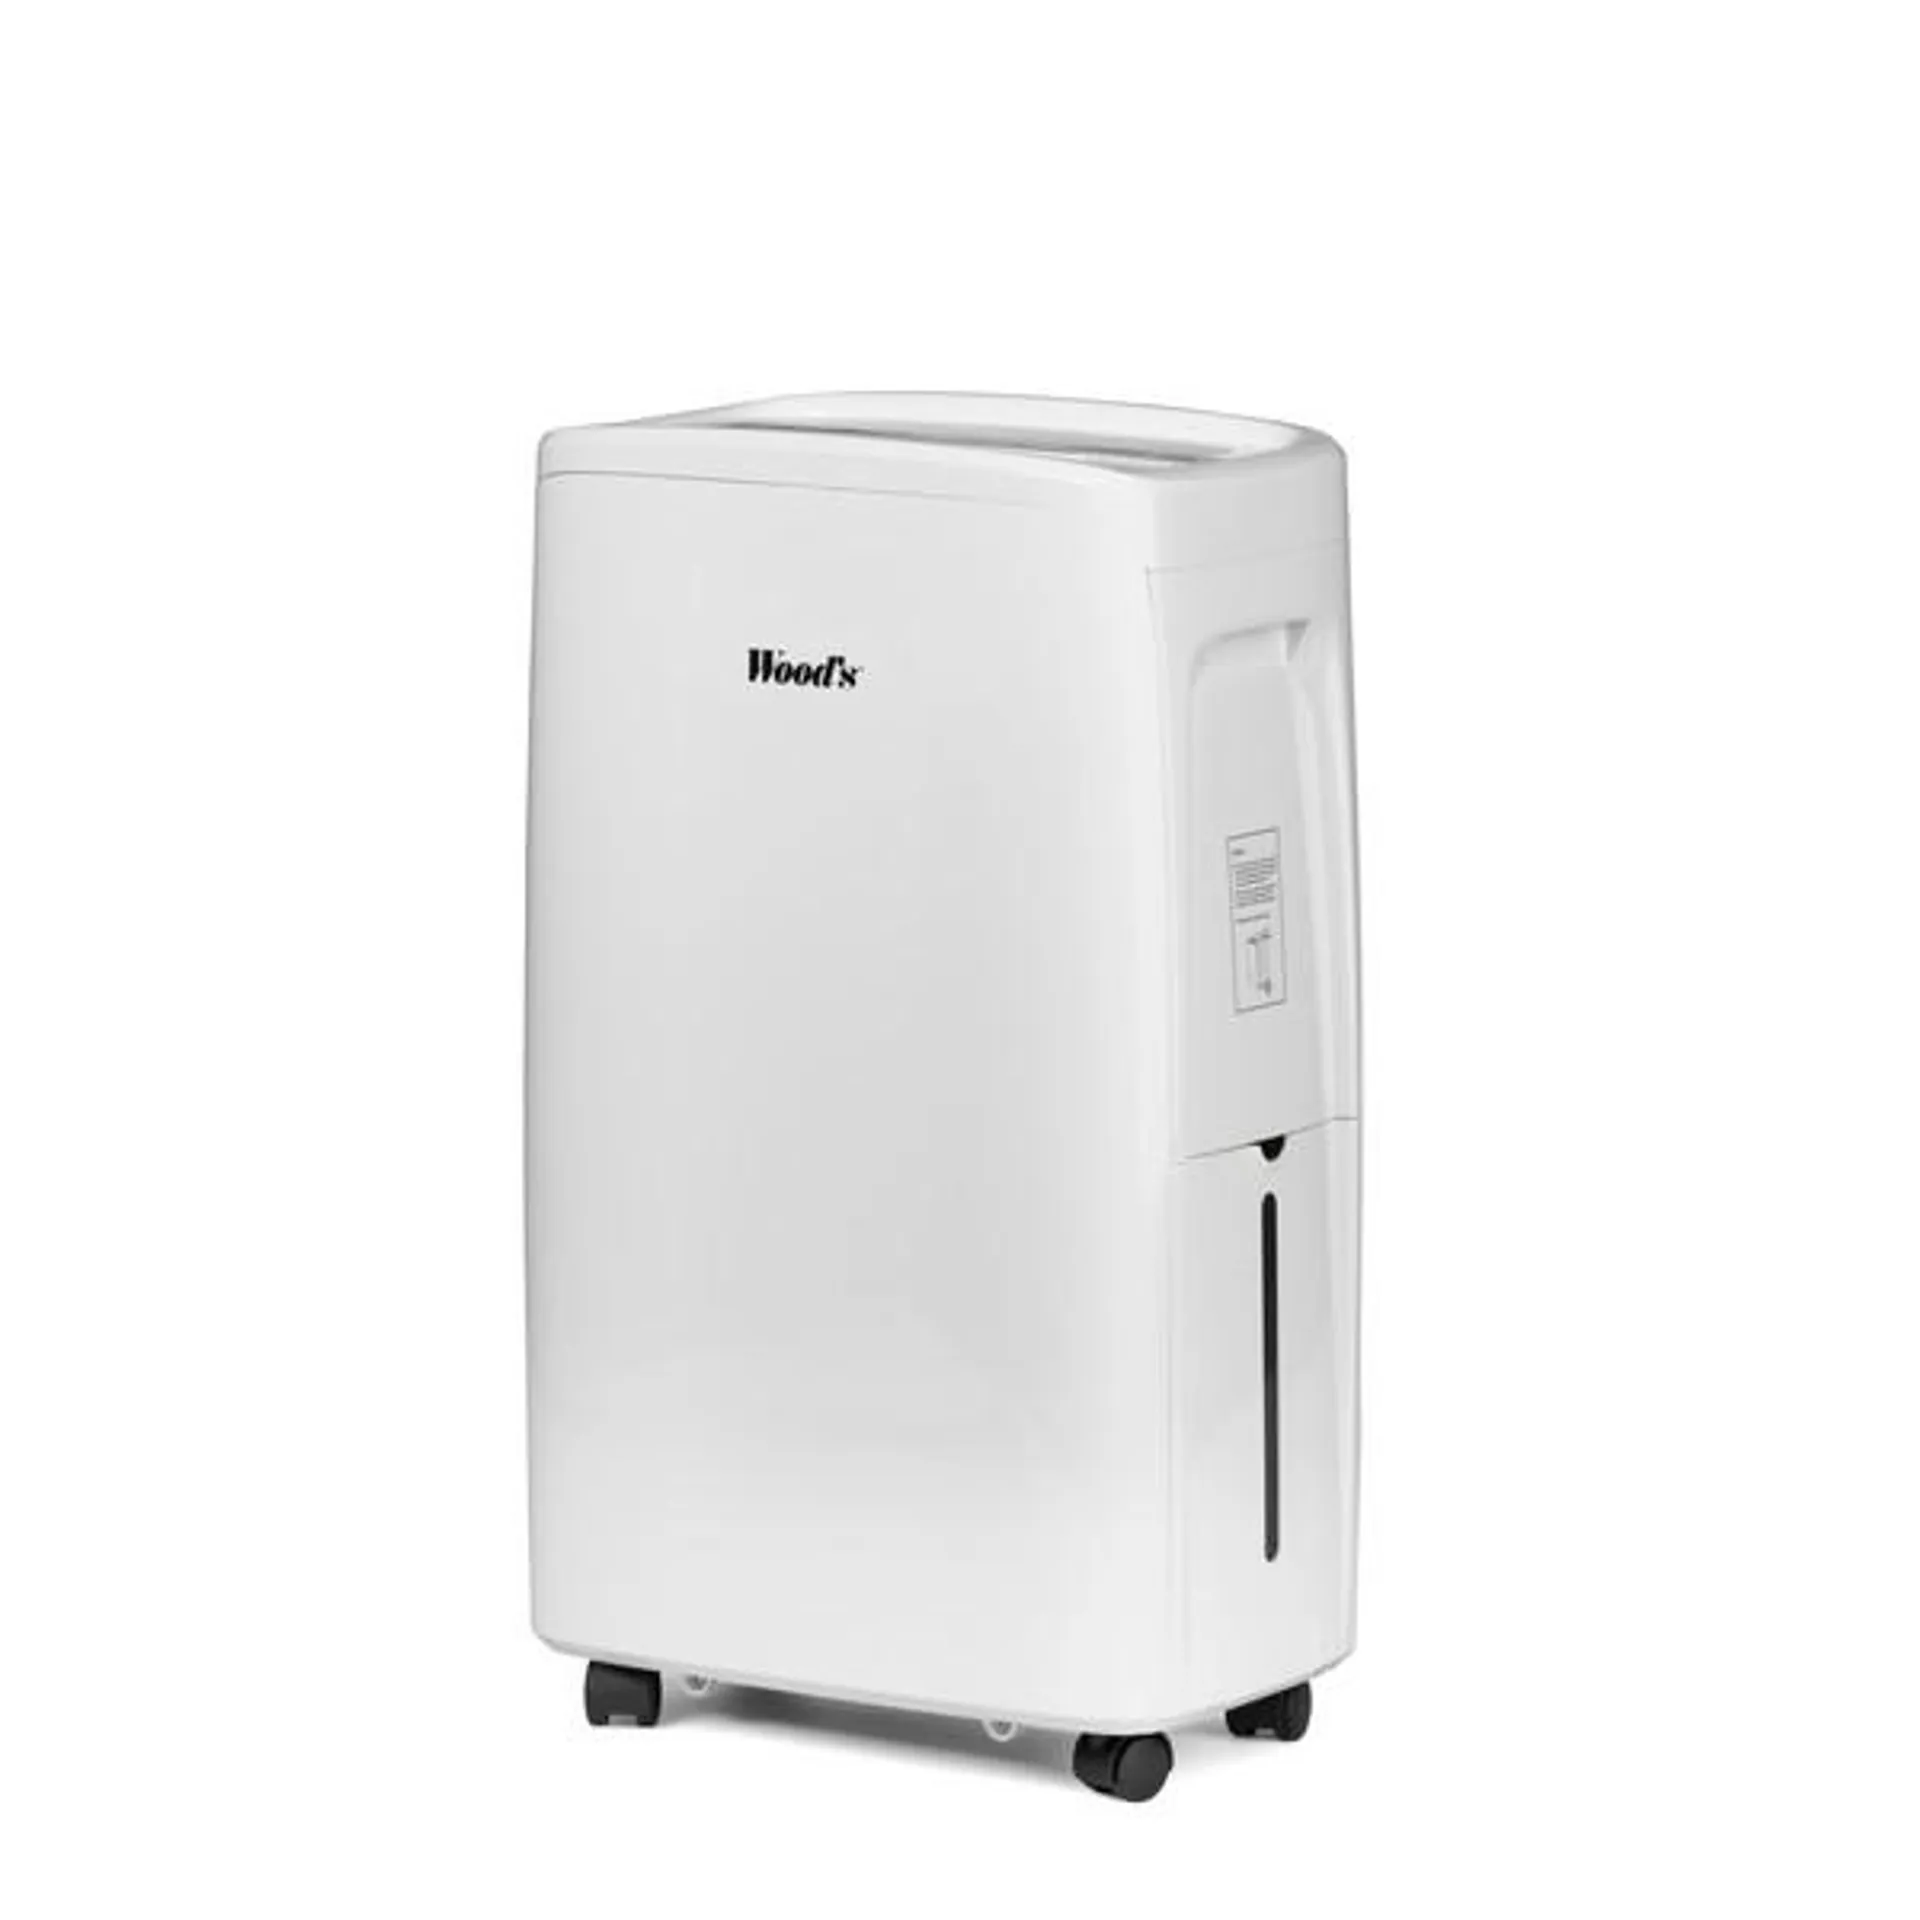 Woods Compact MDX14 10L Dehumidifier with Laundry Mode